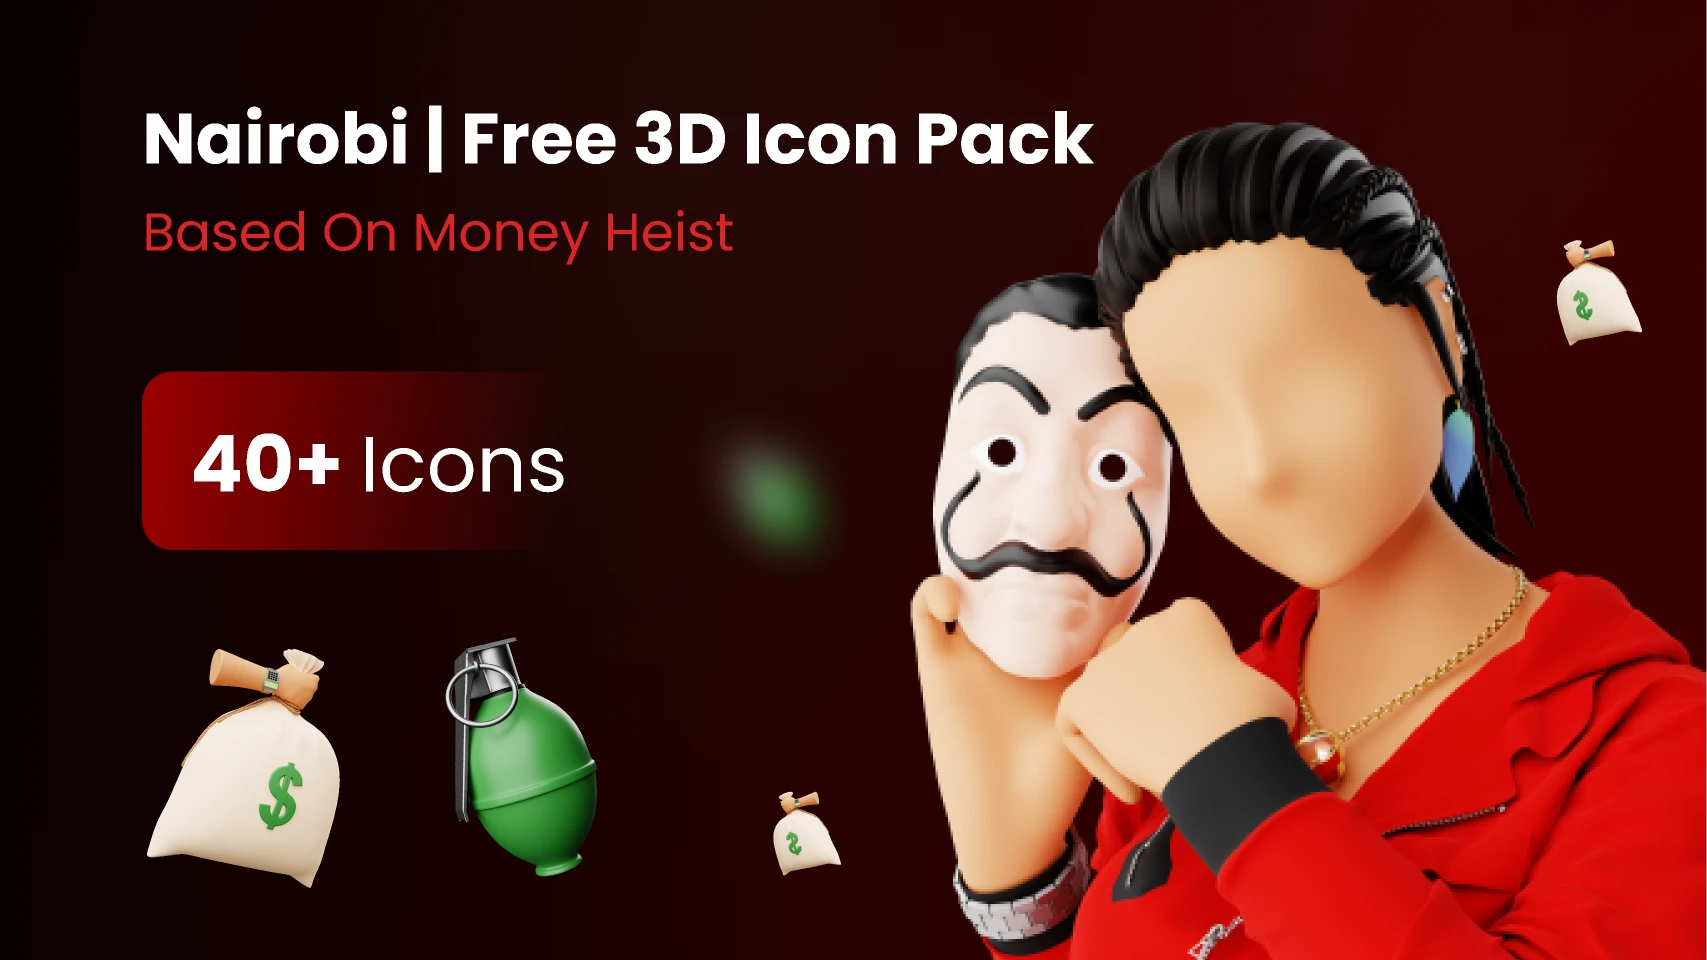 Nairobi | Free 3D Icon Pack Based On Money Heist for Figma and Adobe XD